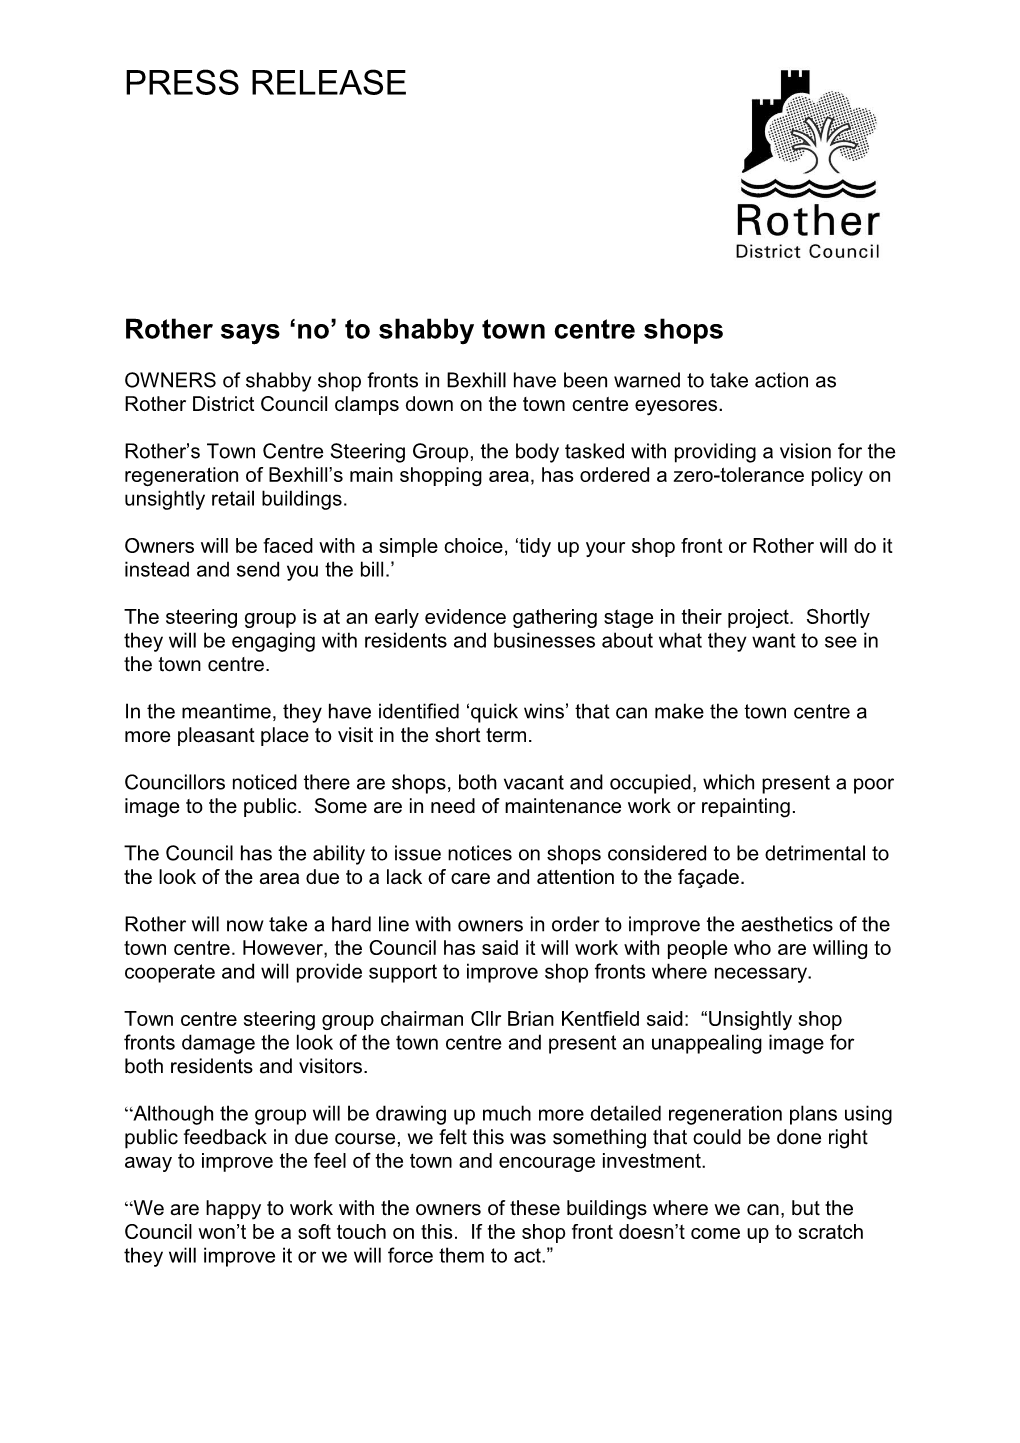 Rother Says No to Shabby Town Centre Shops